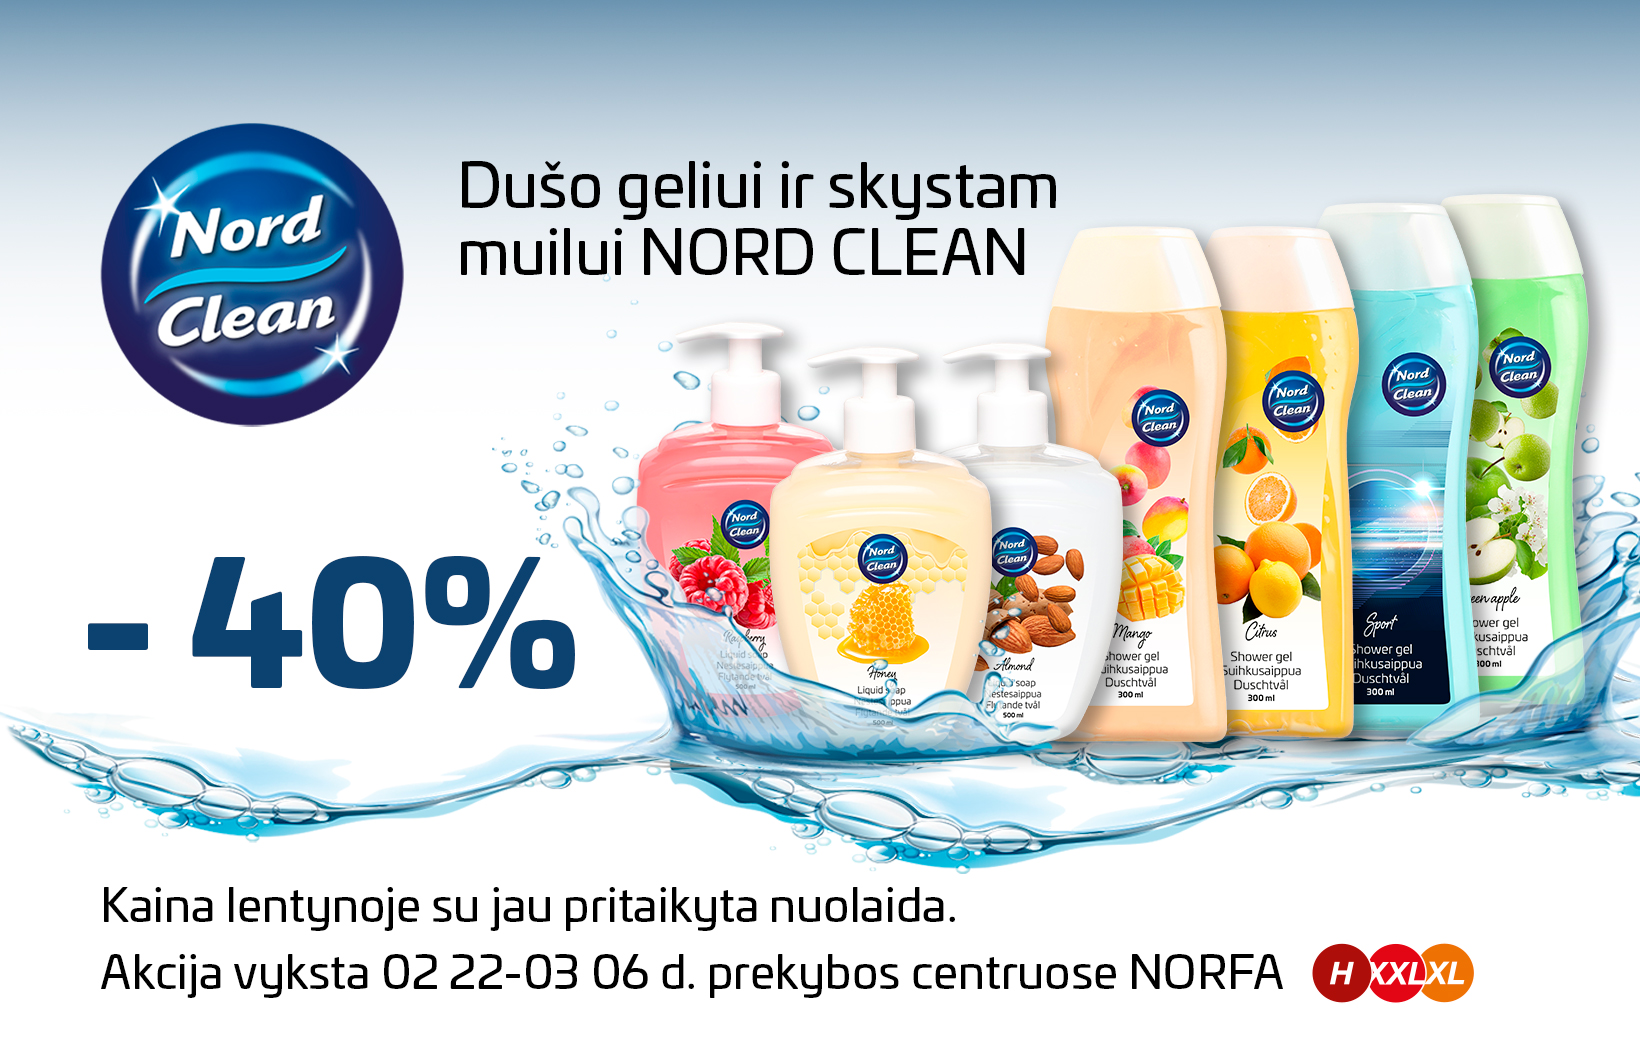 Nord Clean hand soap and body wash 1640x1040px v2